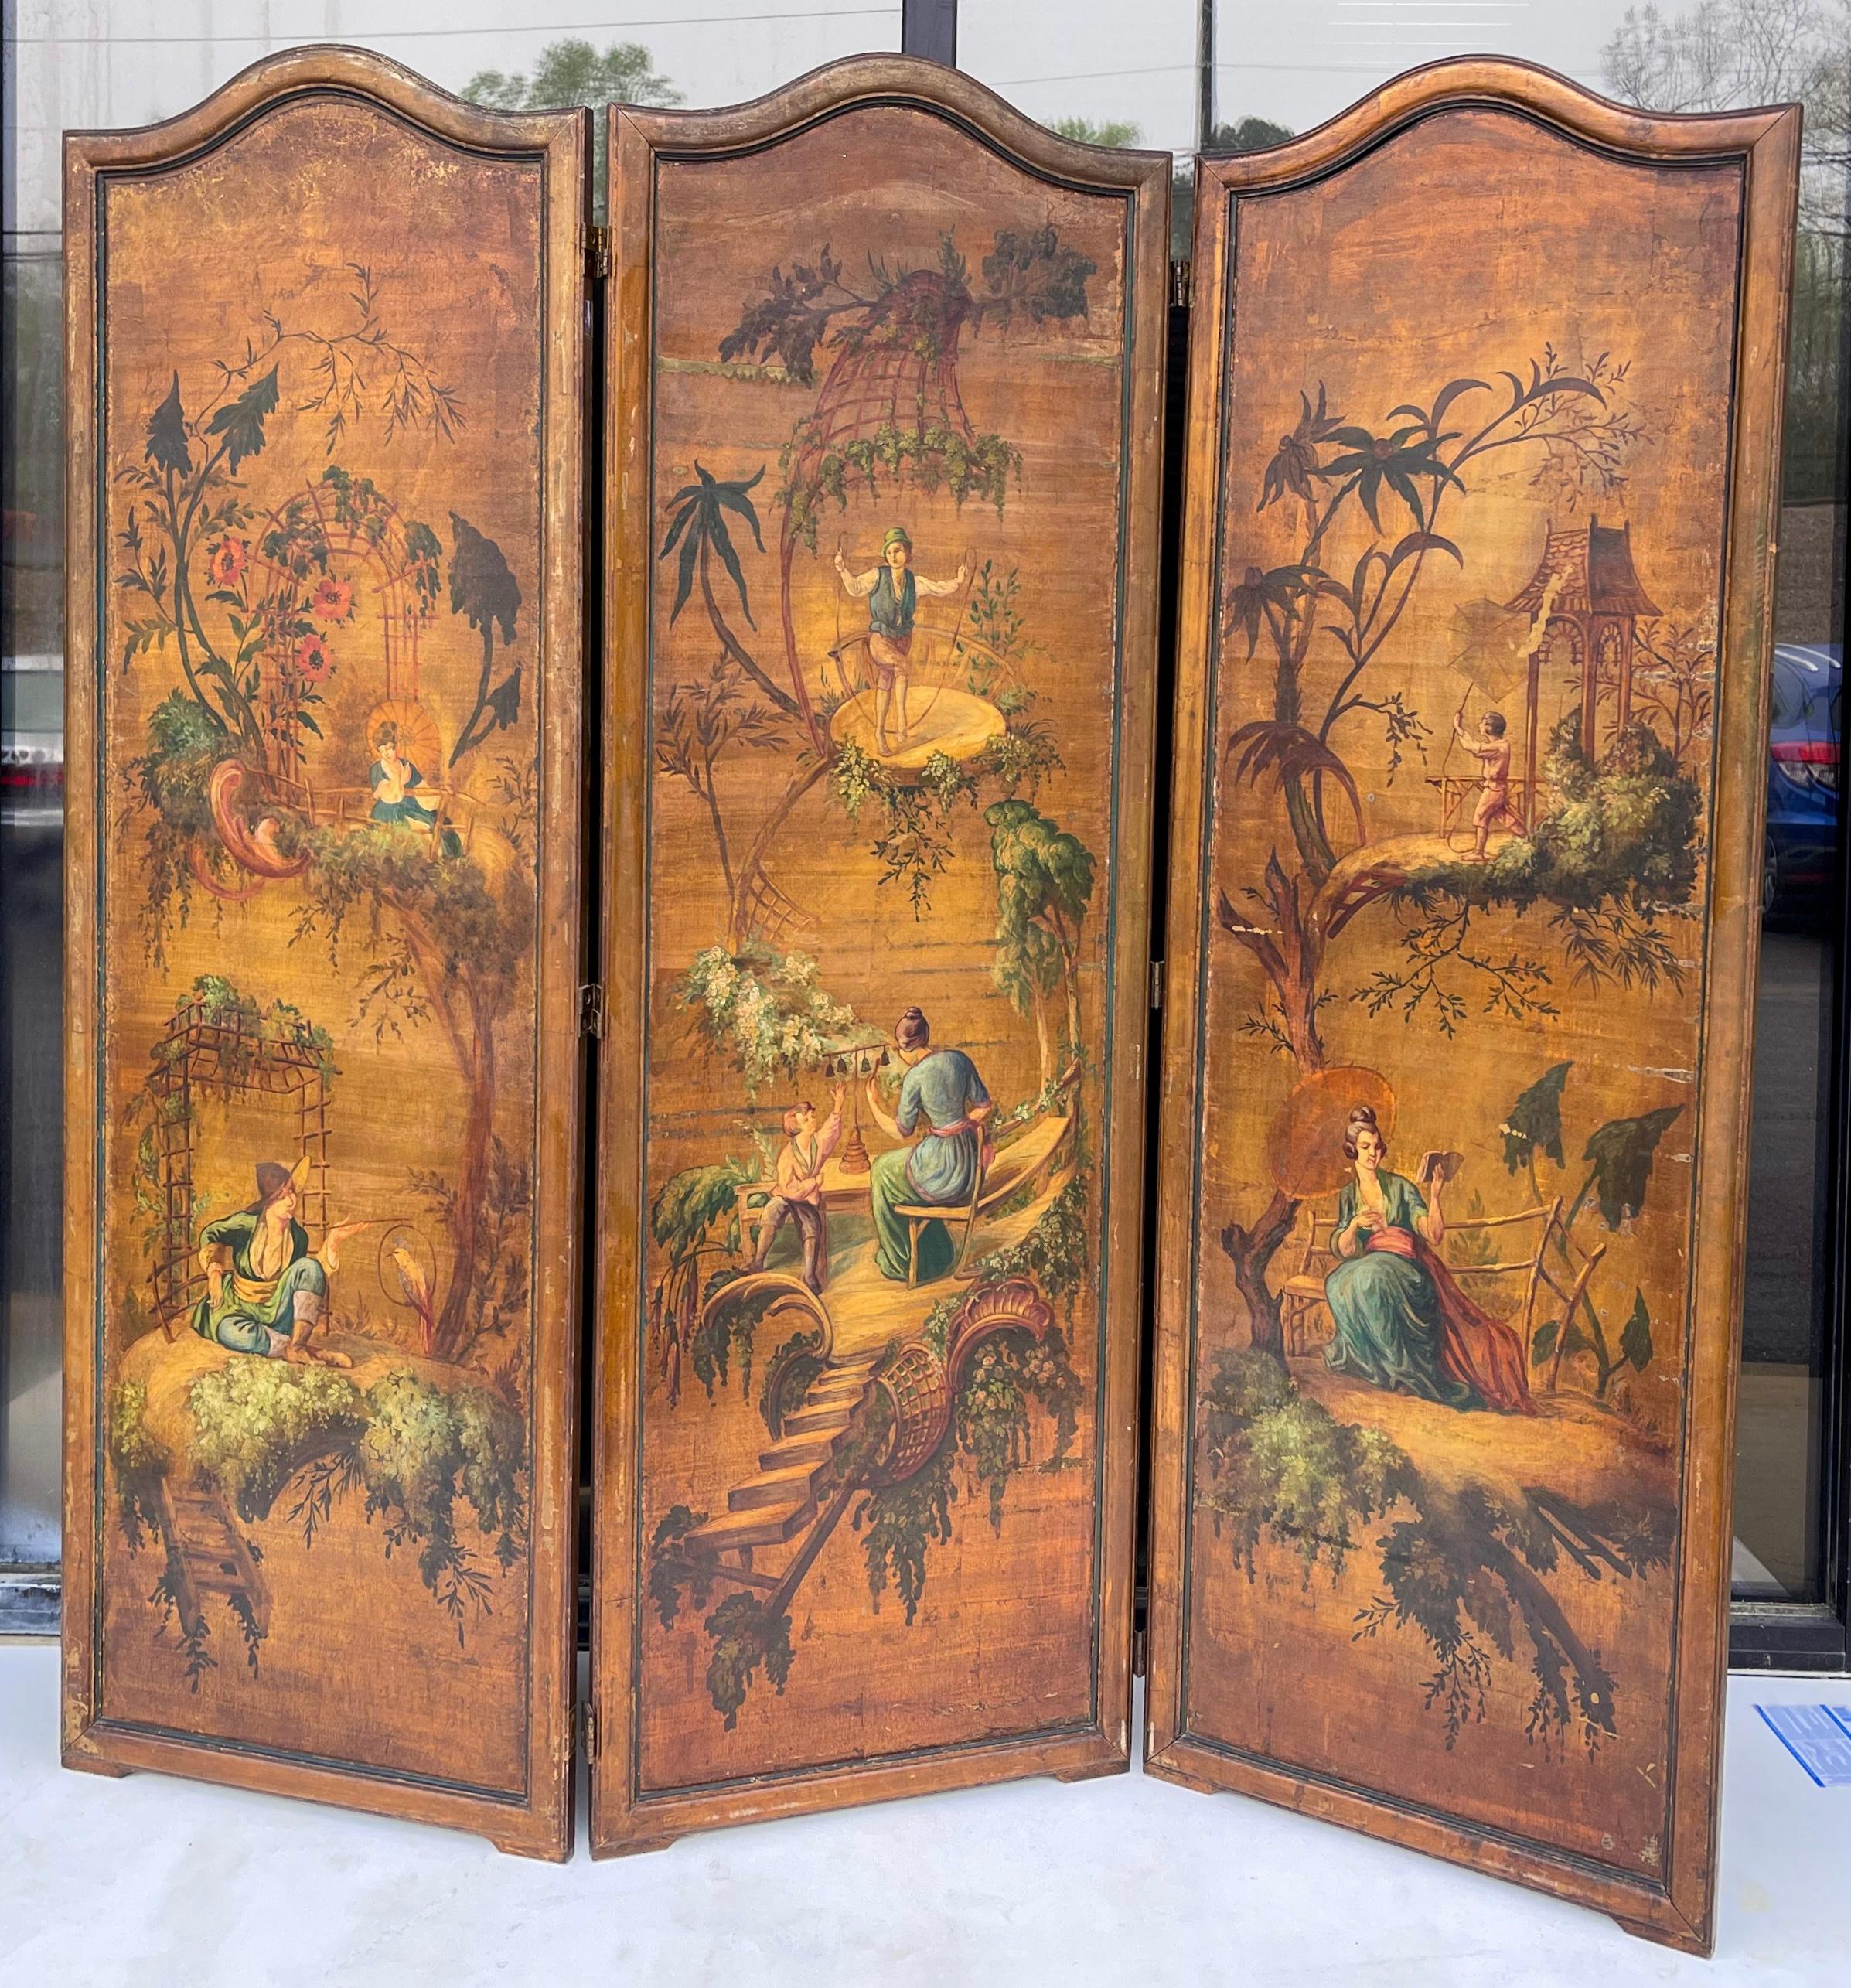 Early 20th-C. Hand Painted French Chinoiserie Oil On Canvas Screen - 3 Panels  In Good Condition For Sale In Kennesaw, GA